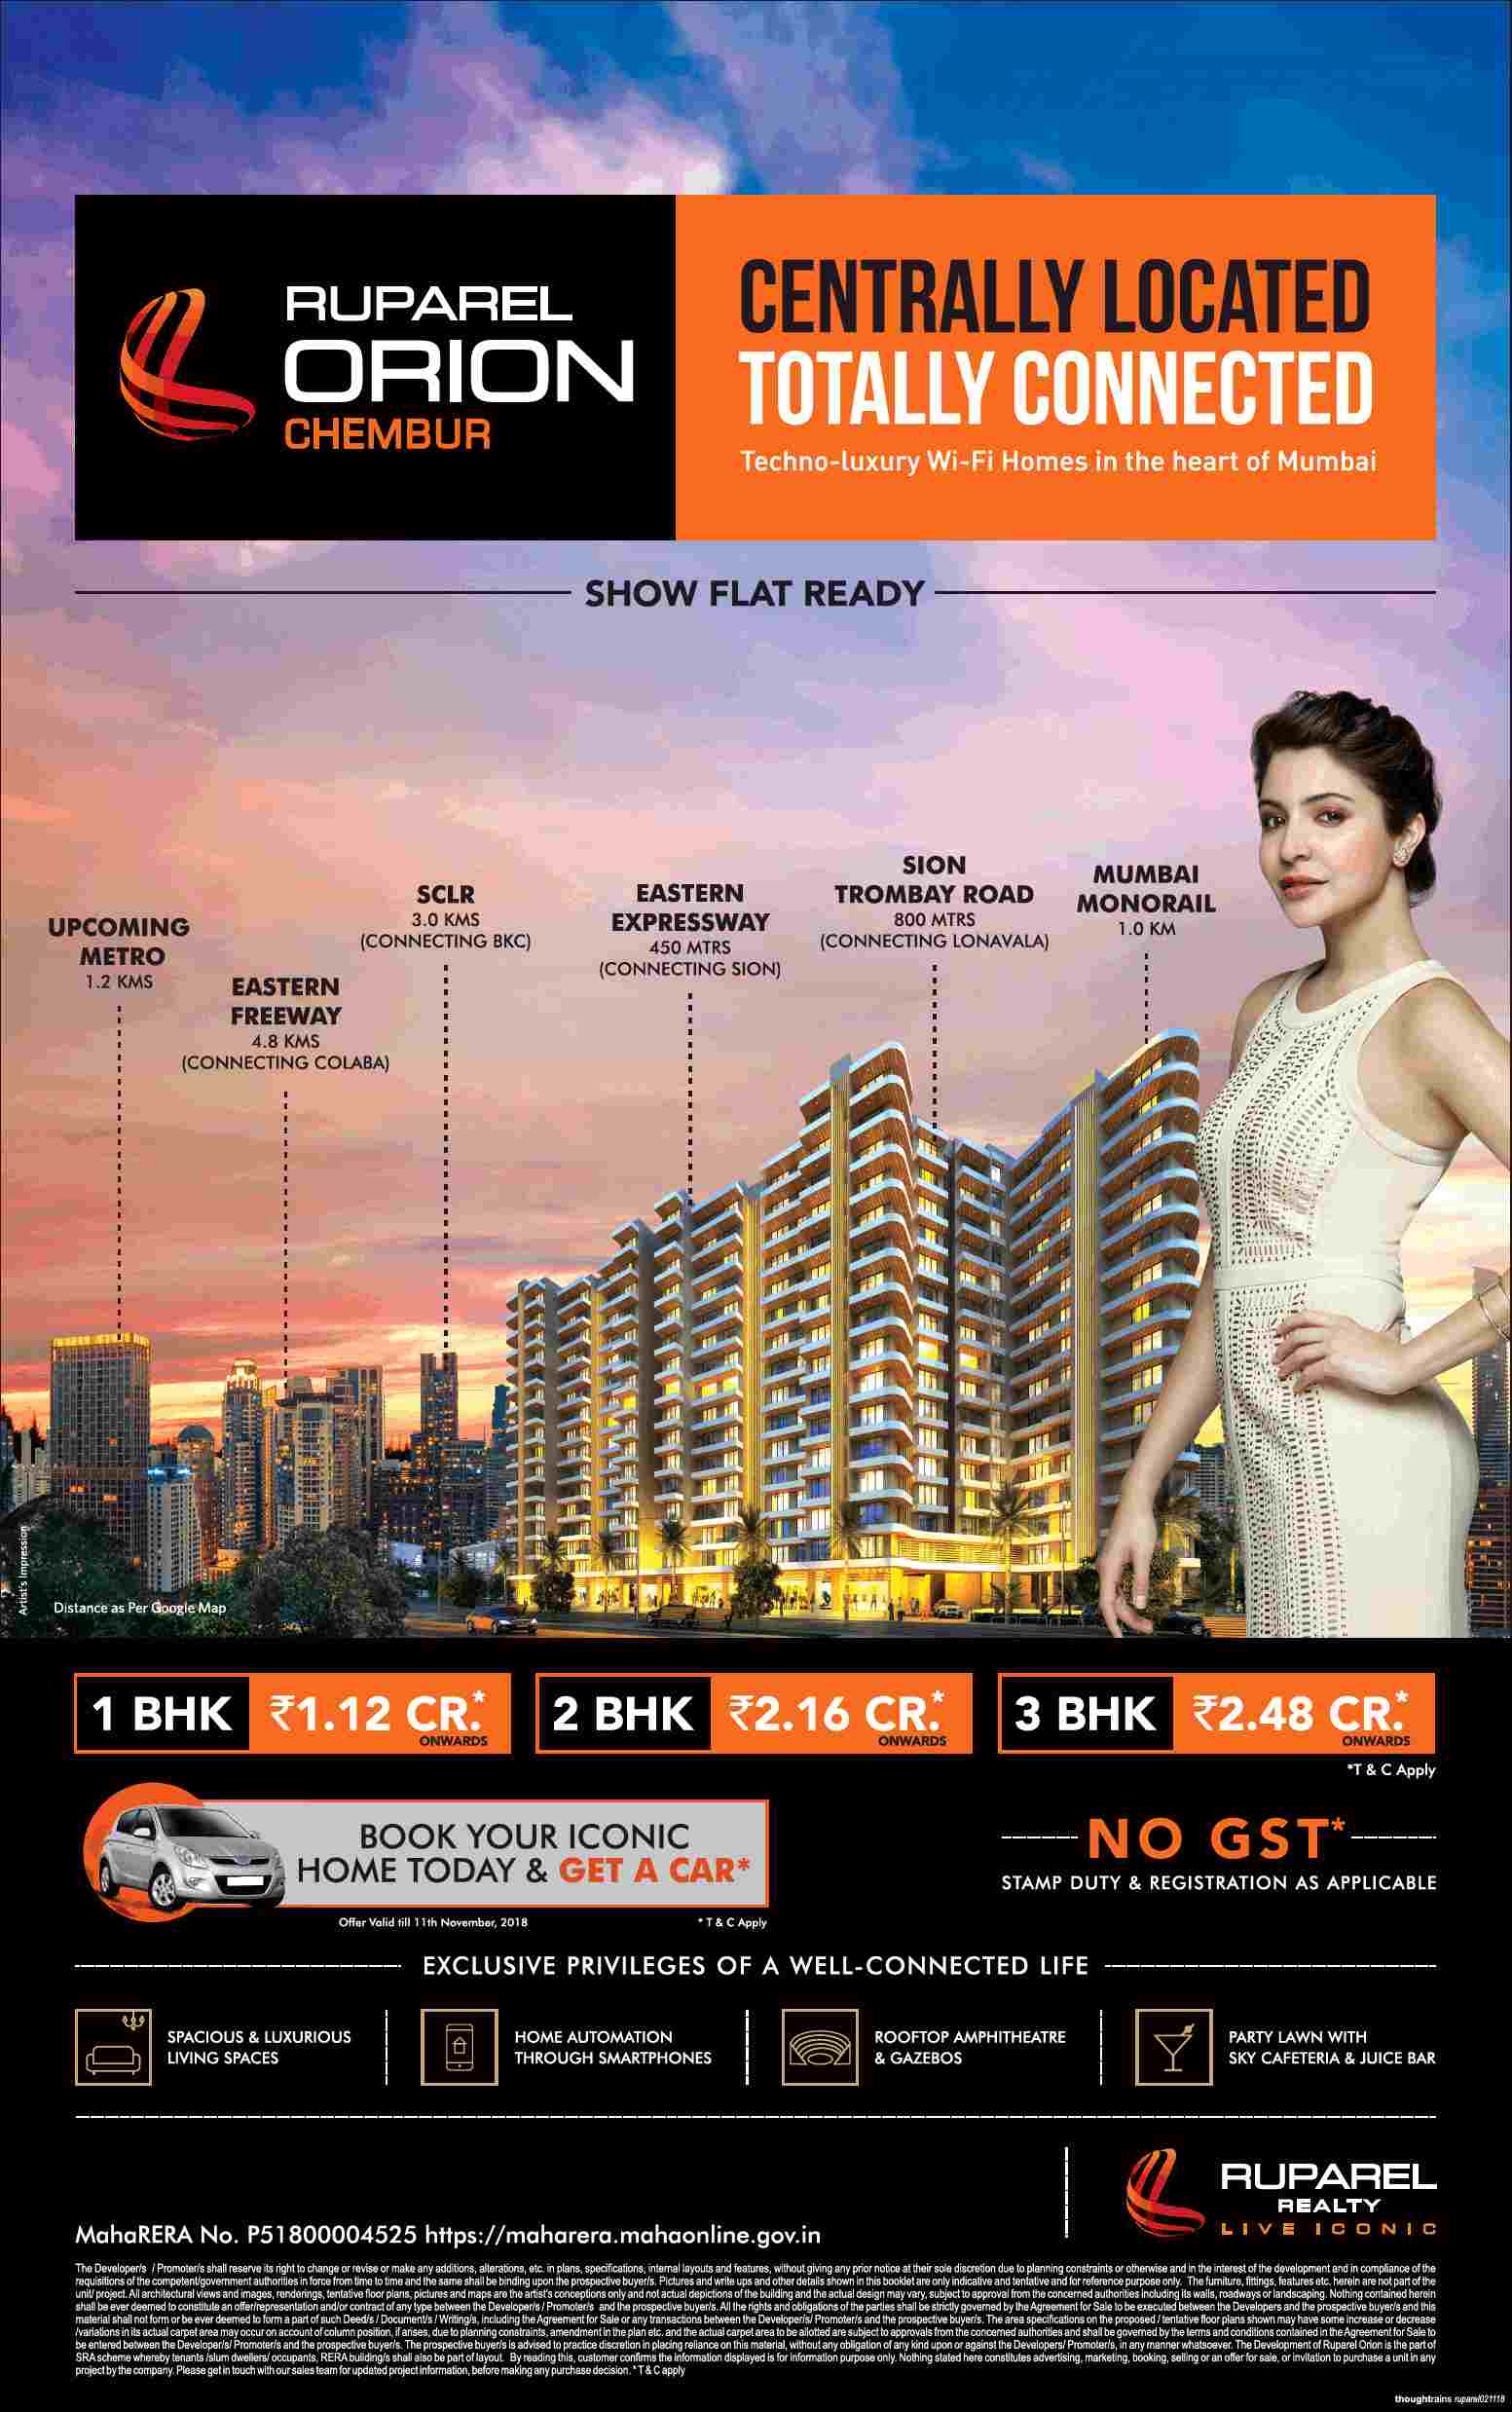 Get a car on booking an iconic home at Ruparel Orion in Chembur, Mumbai Update